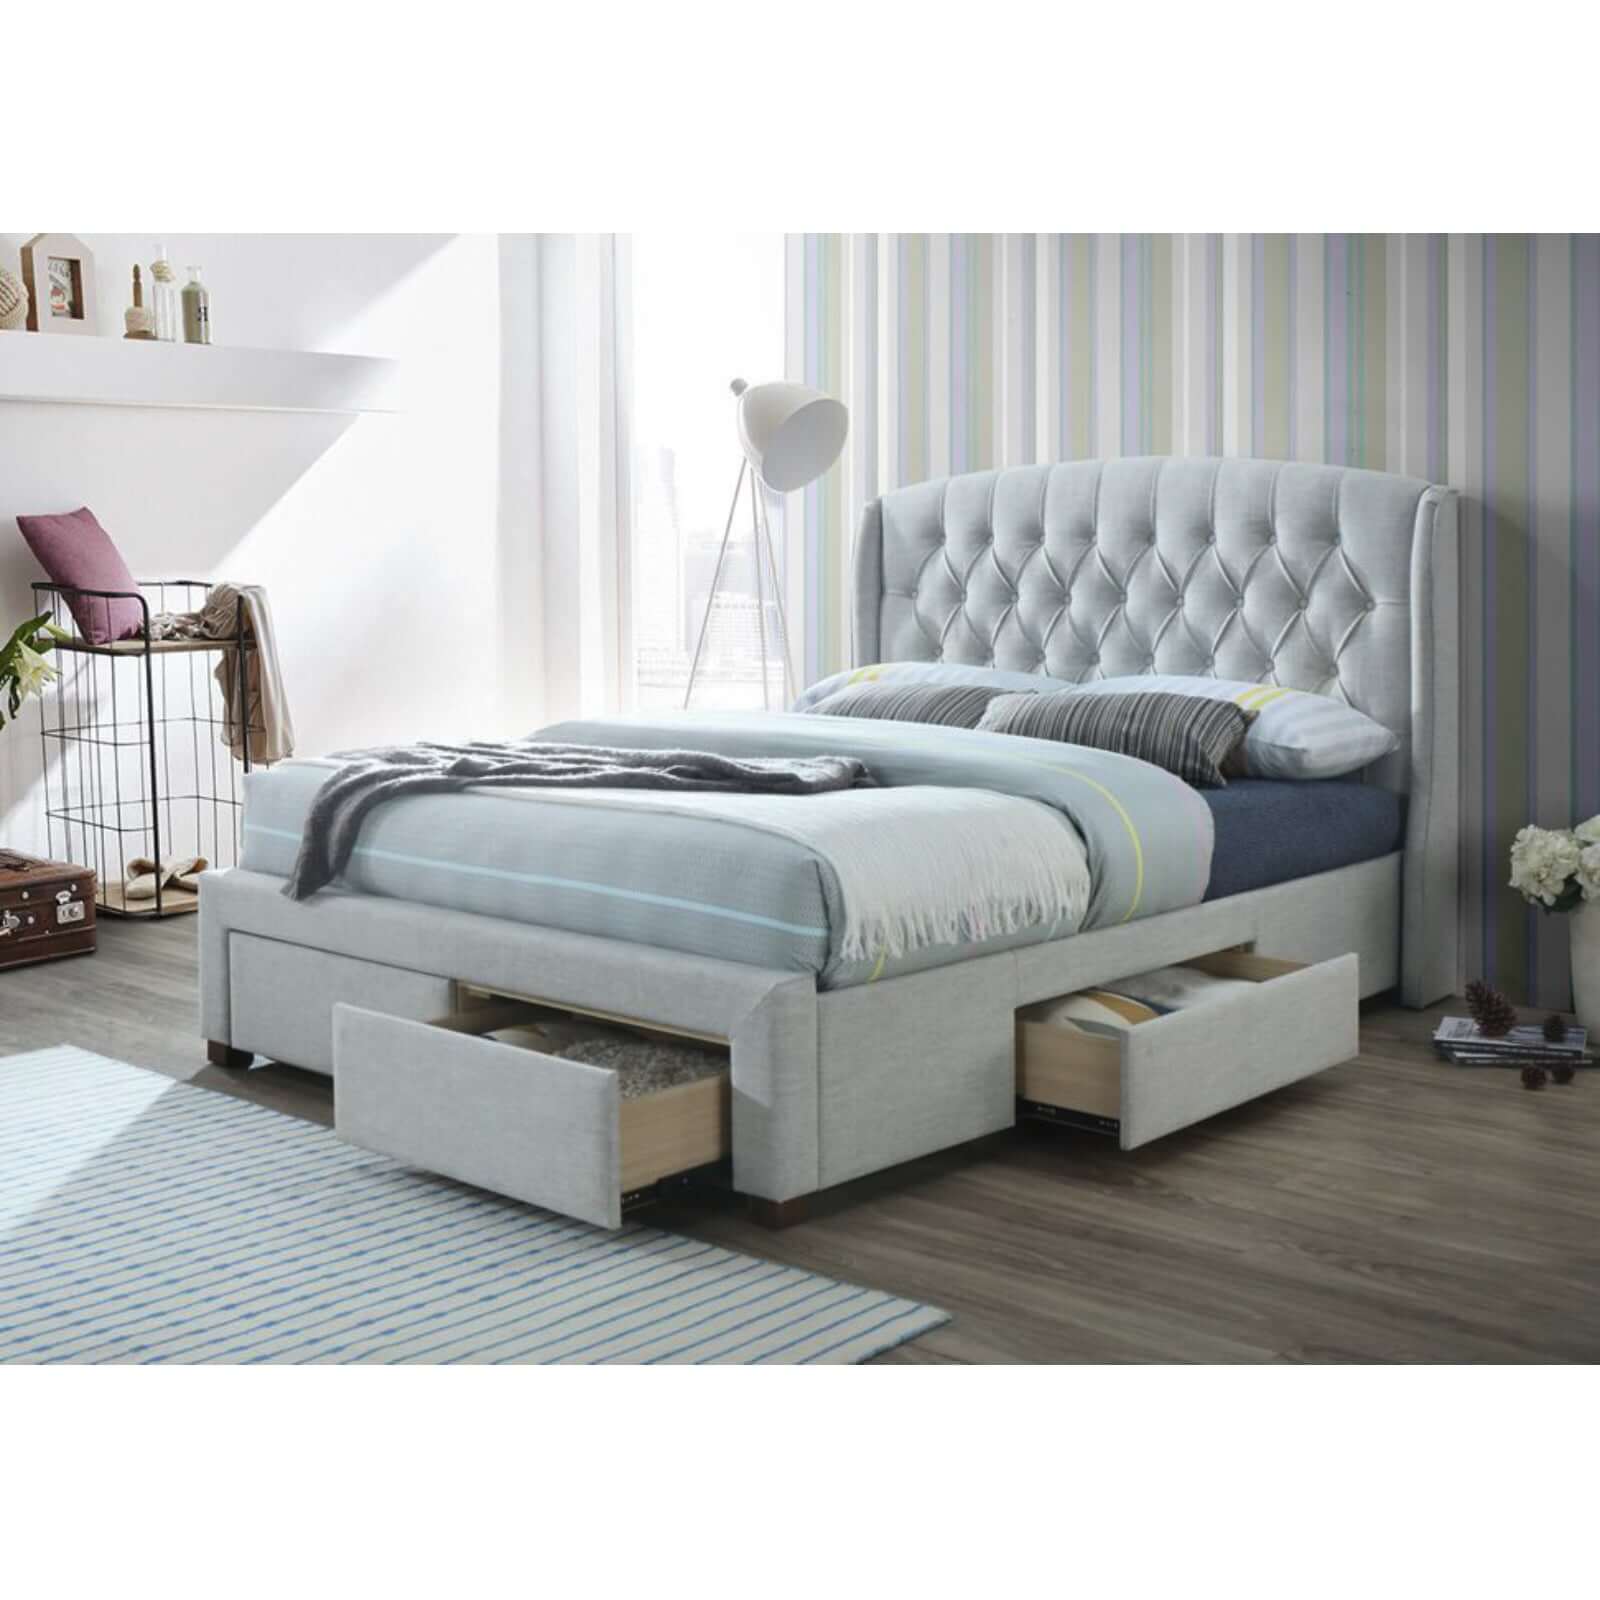 Luxurious Beige King Bed Frame with Storage-Upinteriors